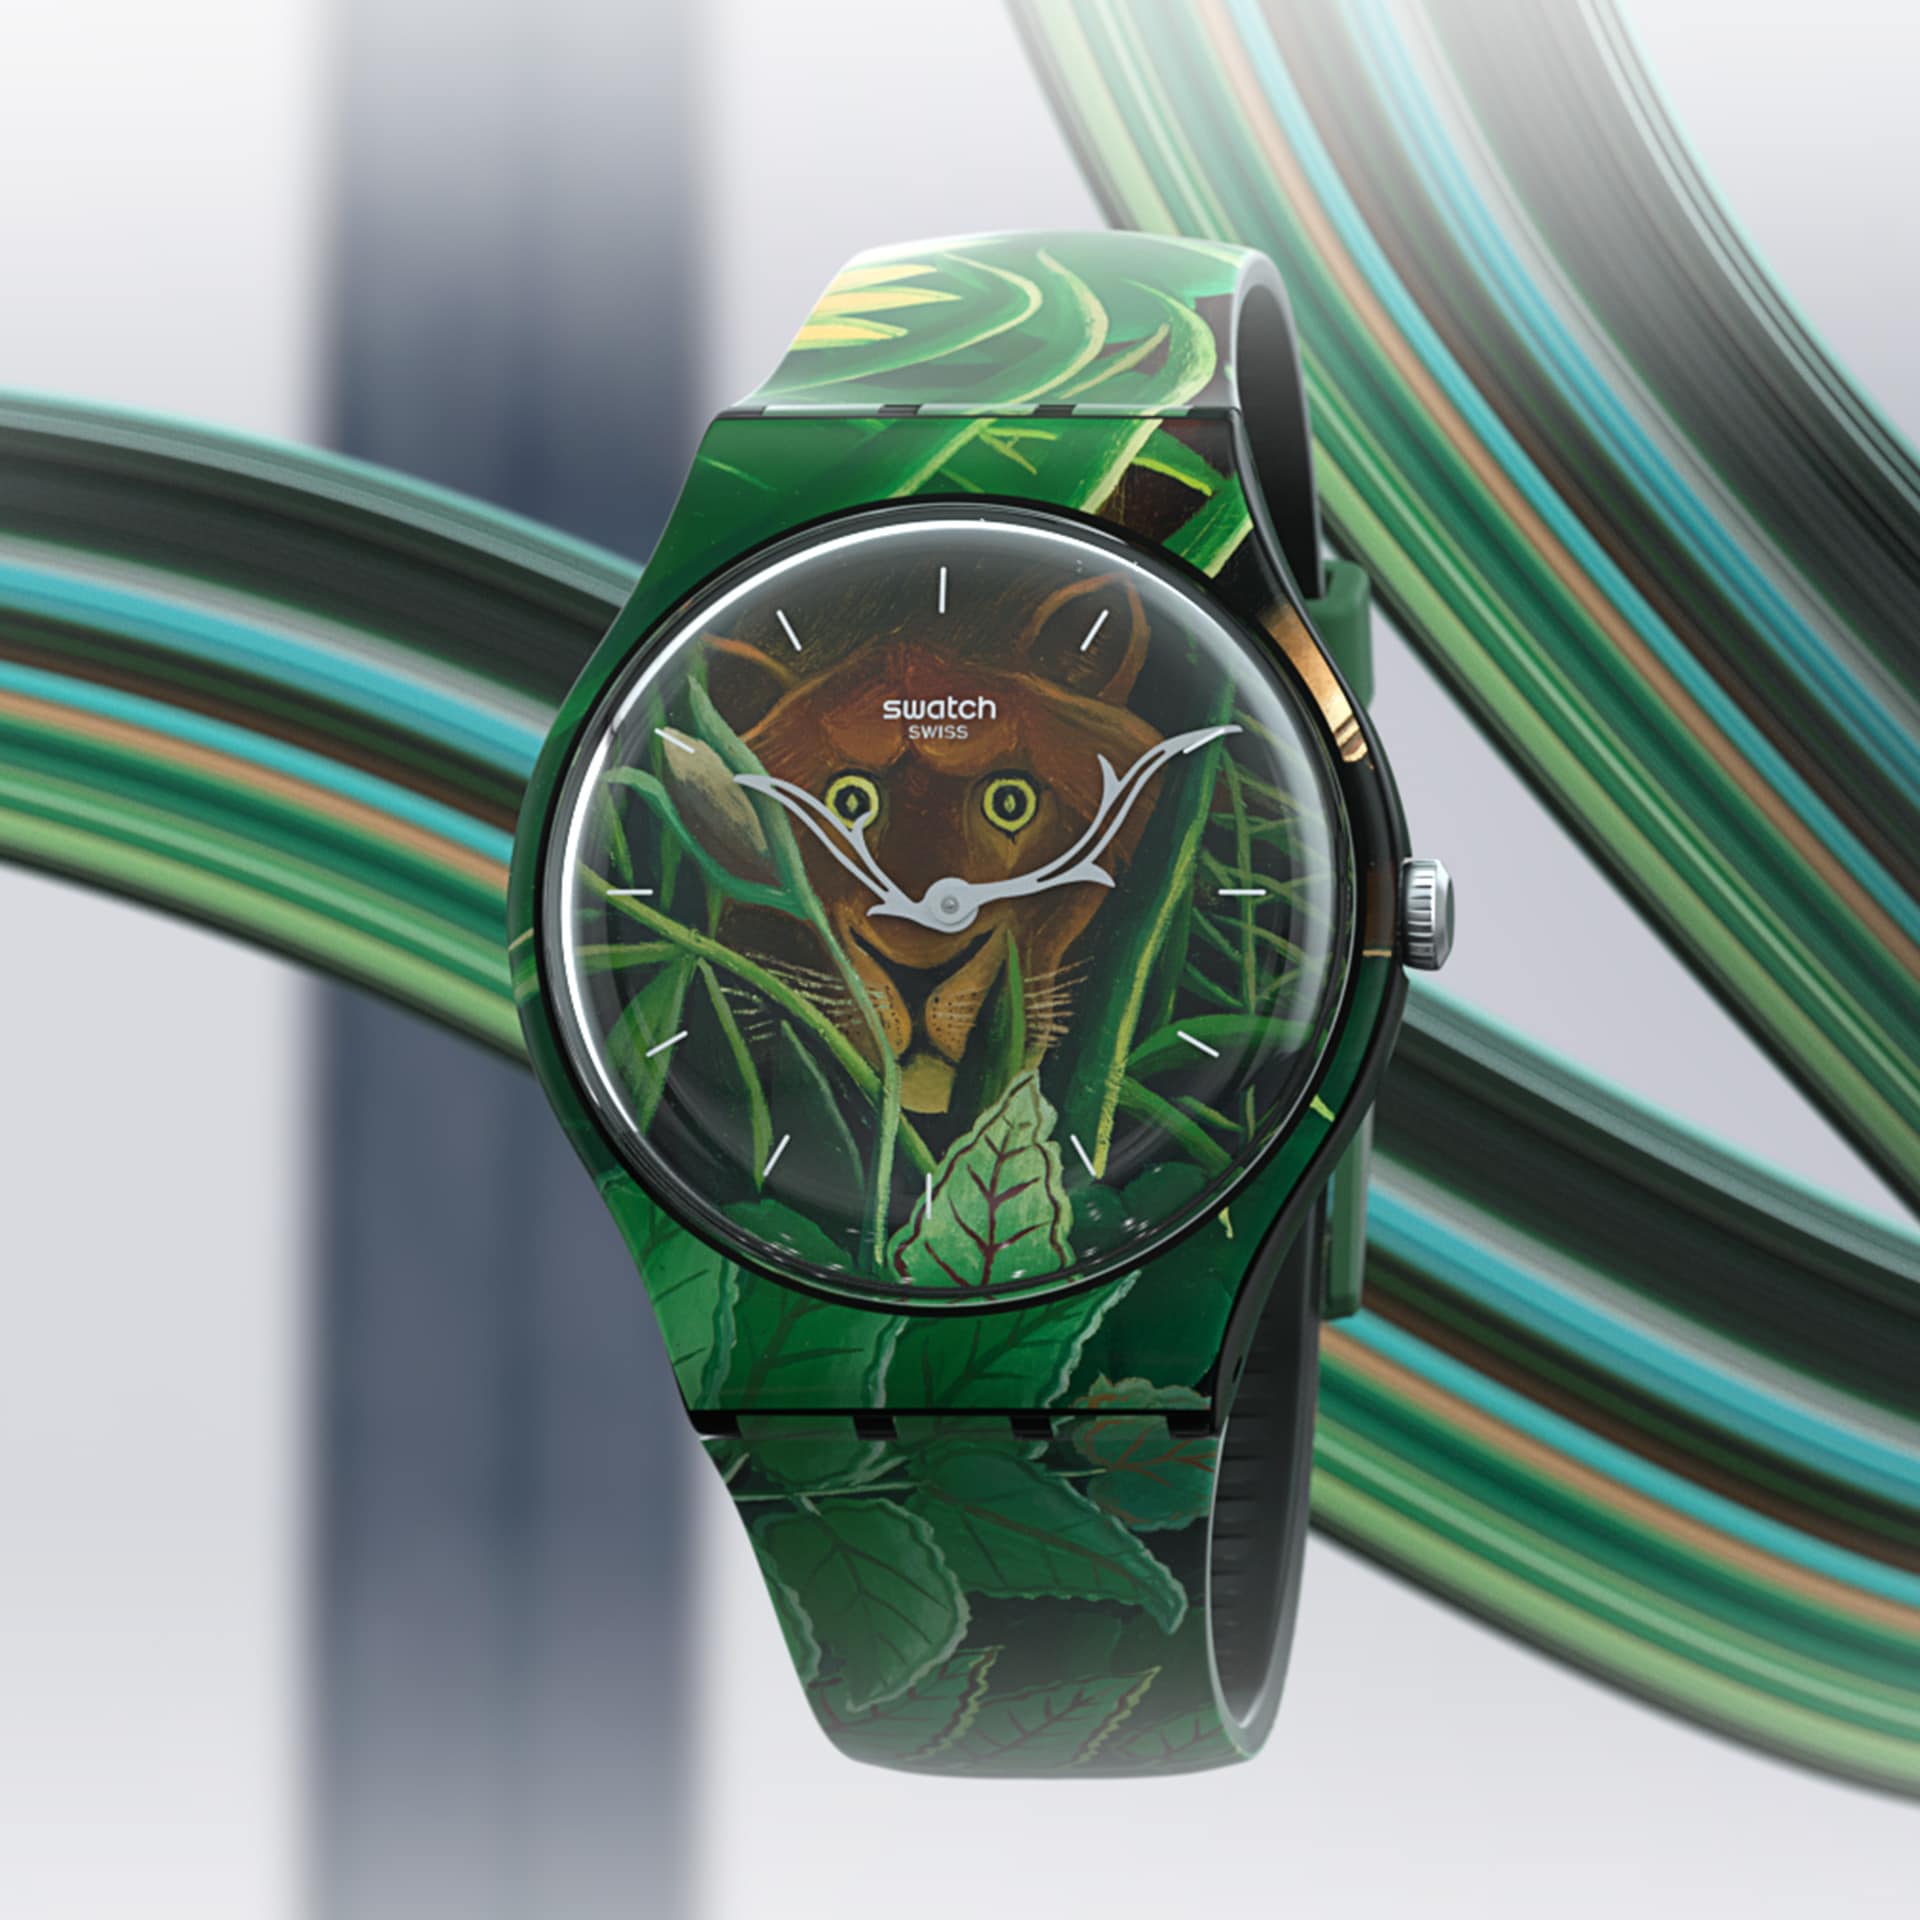 SUOZ333 - THE DREAM BY HENRI ROUSSEAU, THE WATCH - Swatch® Japan